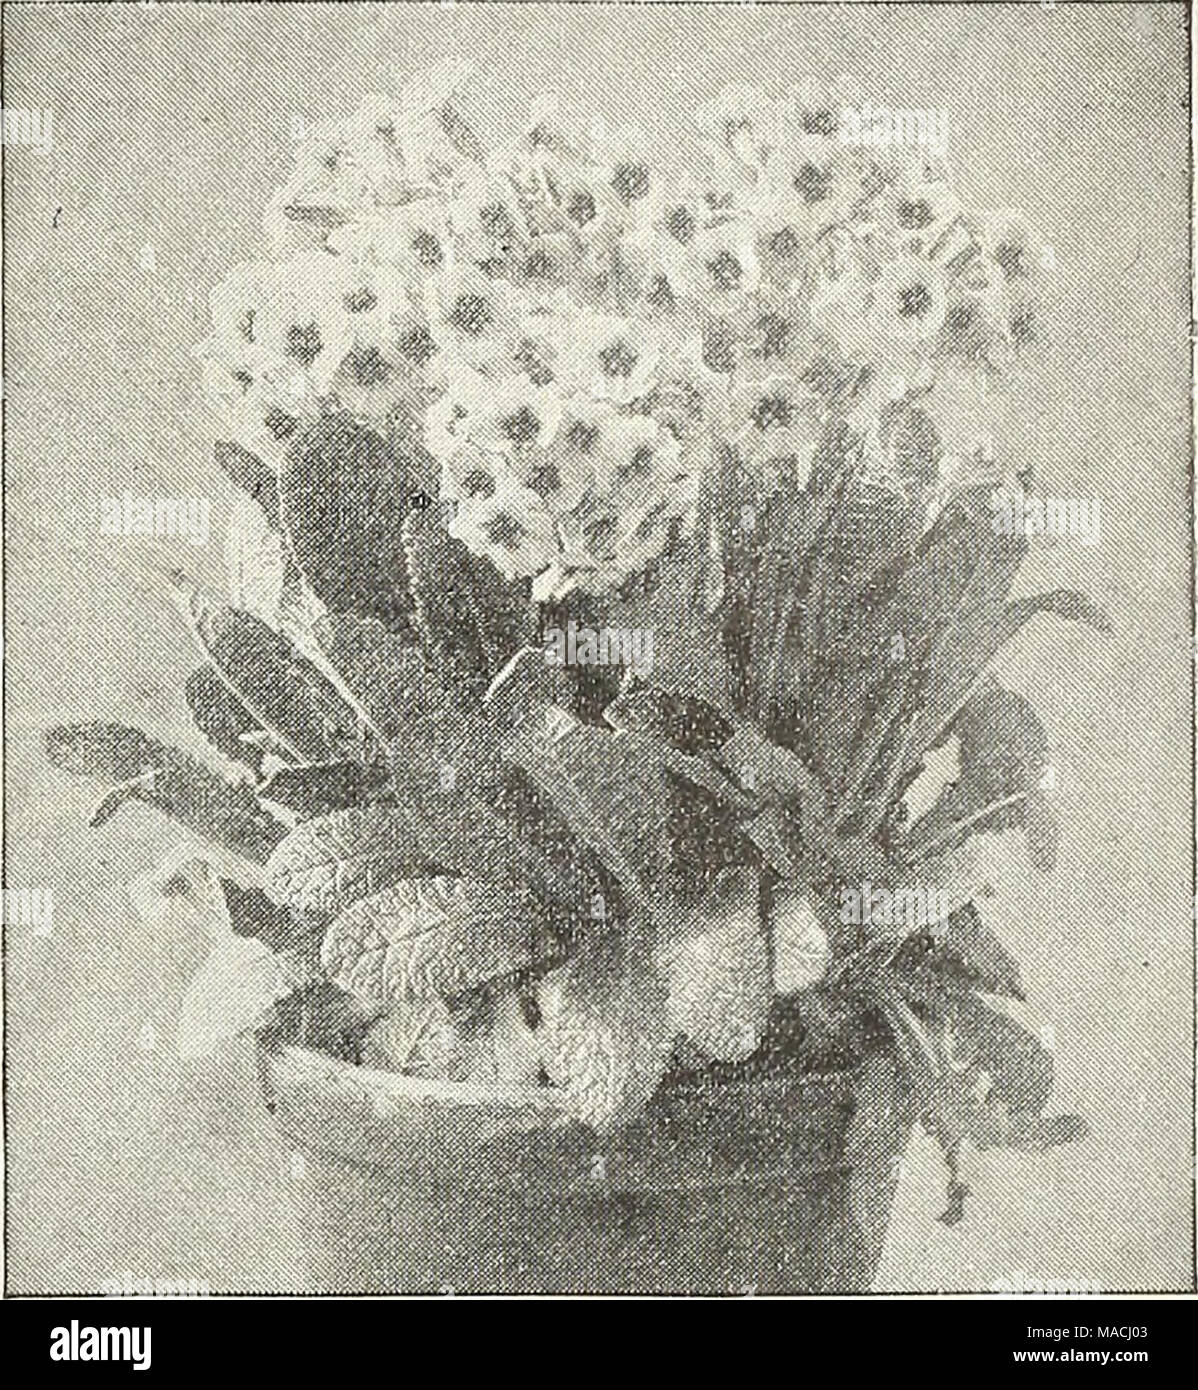 . Dreer's wholesale price list for 1901 : flower seeds, bulbs, aquatics, plants vegetable seeds, tools, implements, fertilizers, etc., etc . Spectabilis. Strong divisions I 25 10 00 Peistula Veris Superba. Sempervivum (House Leek). Per doz. Per/oo. Anomalum ^o 75 Californicum 75 $i 00 Funki 75 Leucanthum 75 Spiraea. Aruncus Kneiffi. A new variety that is entirely distinct from and superior to all exist- ing kinds ; it is of bold, yet graceful habit, attaining a height of 3 to 4 feet, with finely divided, fern-like, dark green, graceful foli- age, and a mass of pure white feathery flowers, whic Stock Photo